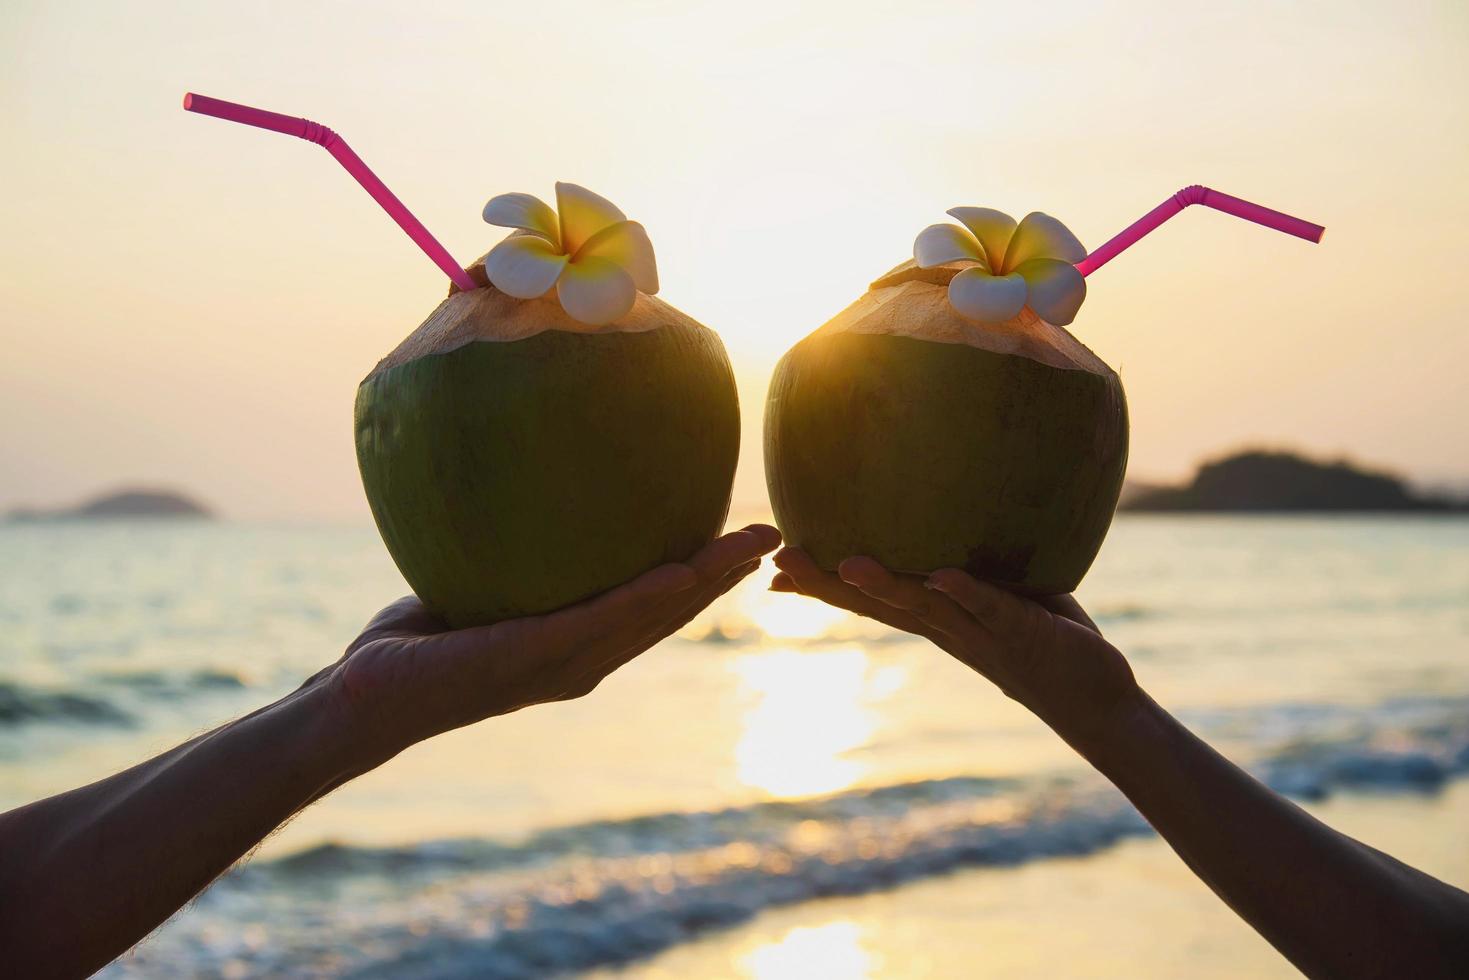 Silhouette of fresh coconut in couples hands with plumeria decorated on beach with sea wave background - tourist with fresh fruit and sea sand sun vacation background concept photo